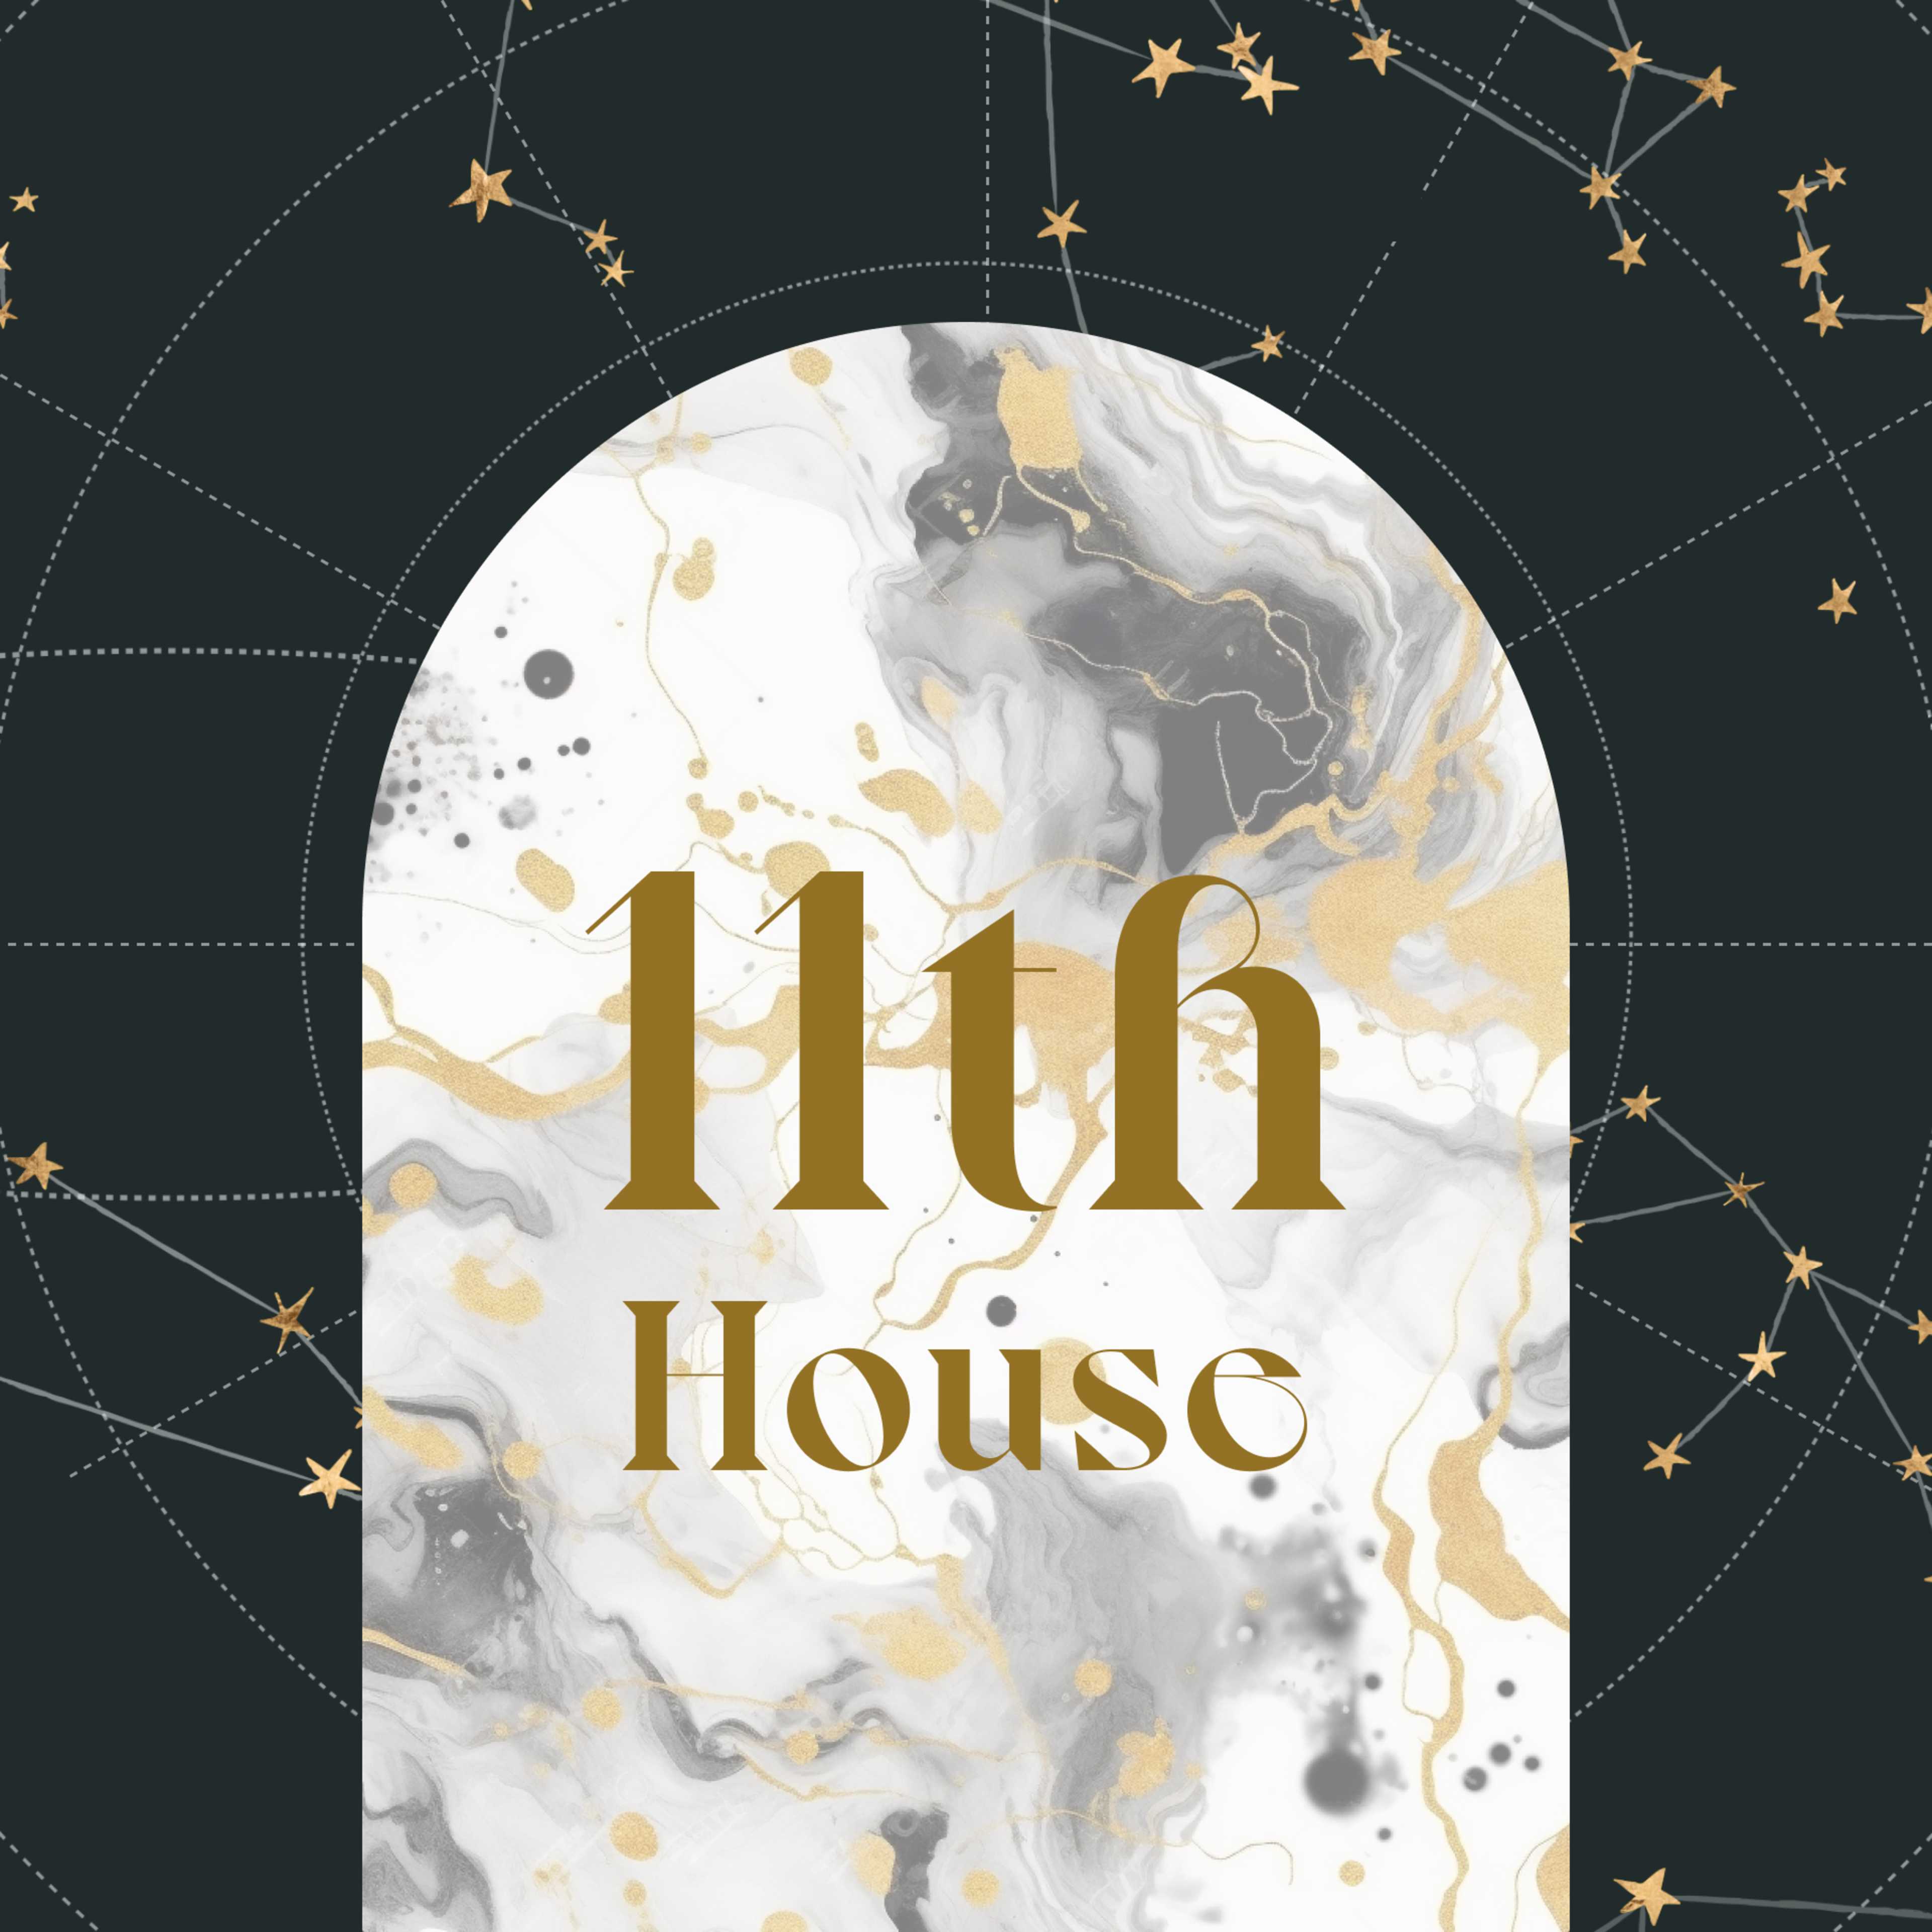 Eleventh House in Astrology